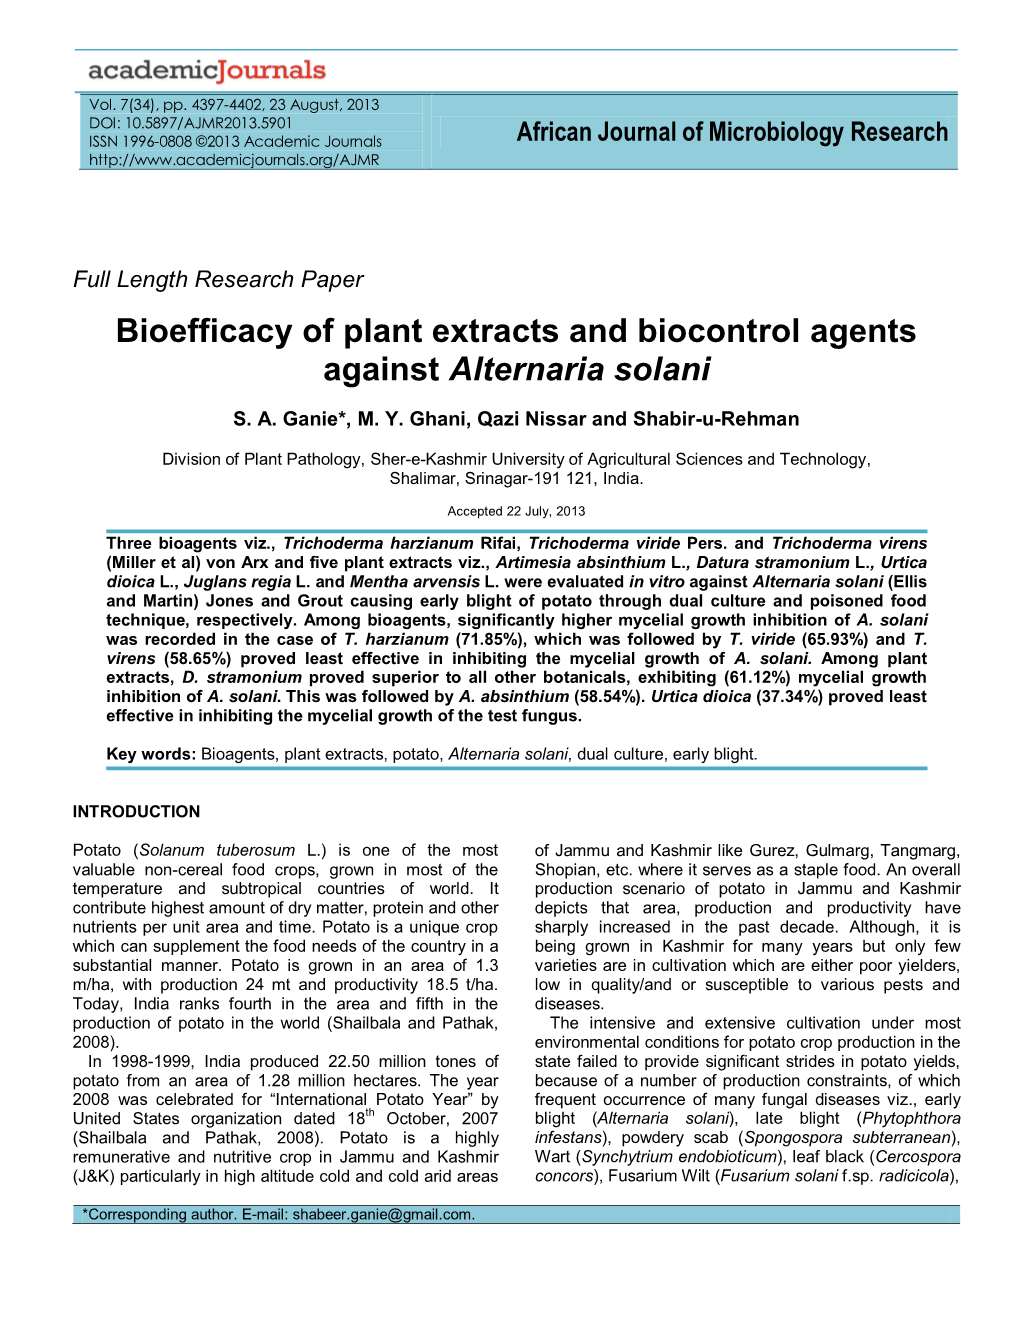 Bioefficacy of Plant Extracts and Biocontrol Agents Against Alternaria Solani